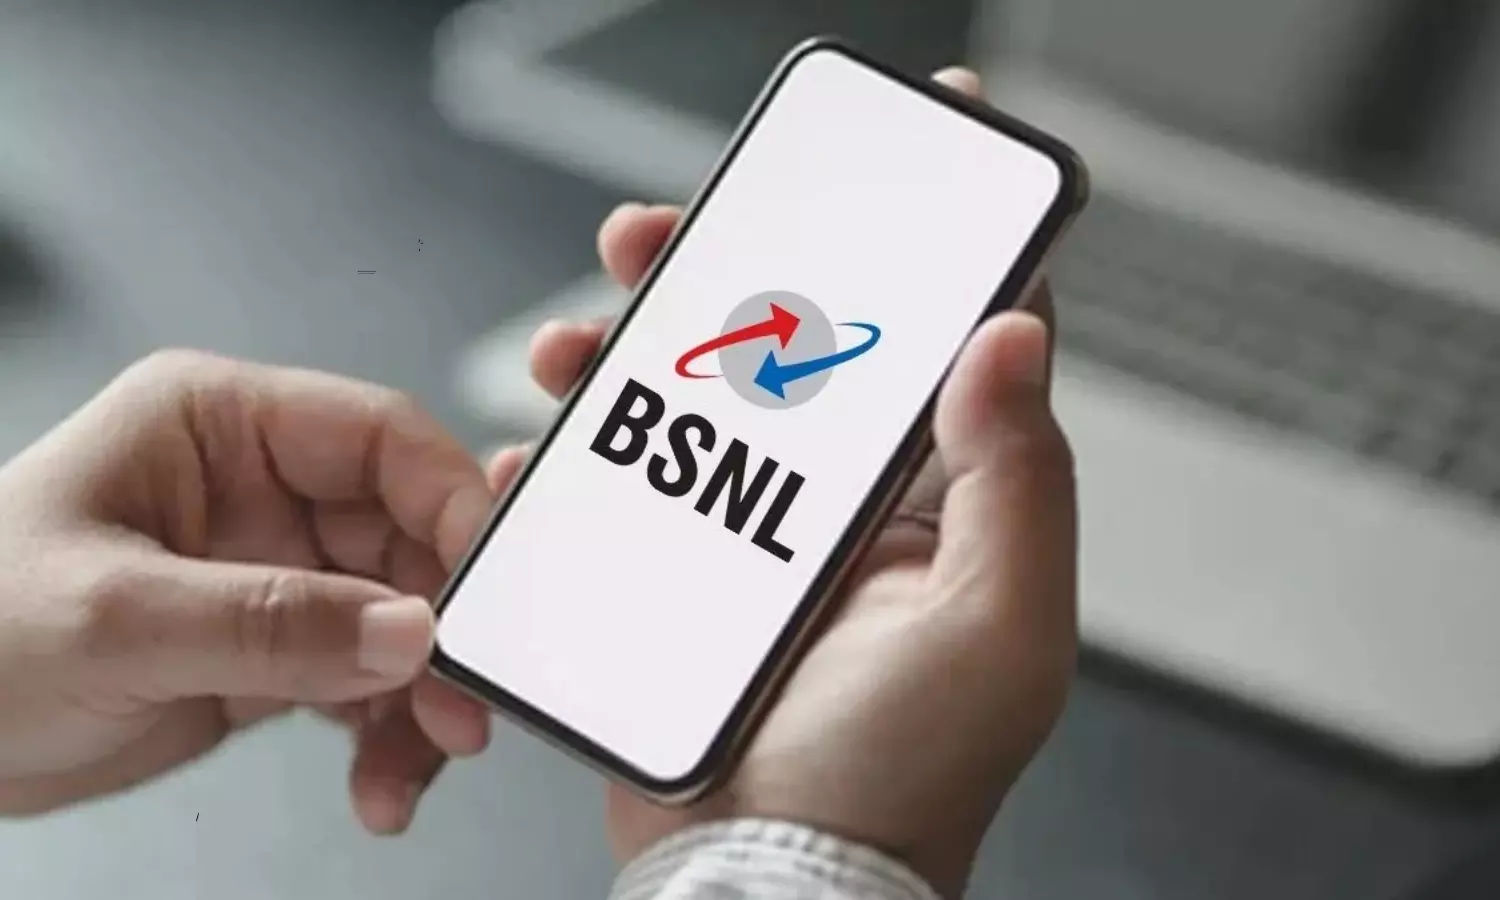 BSNL Offering New Recharge Plan RS 249, Check Here for Full Details